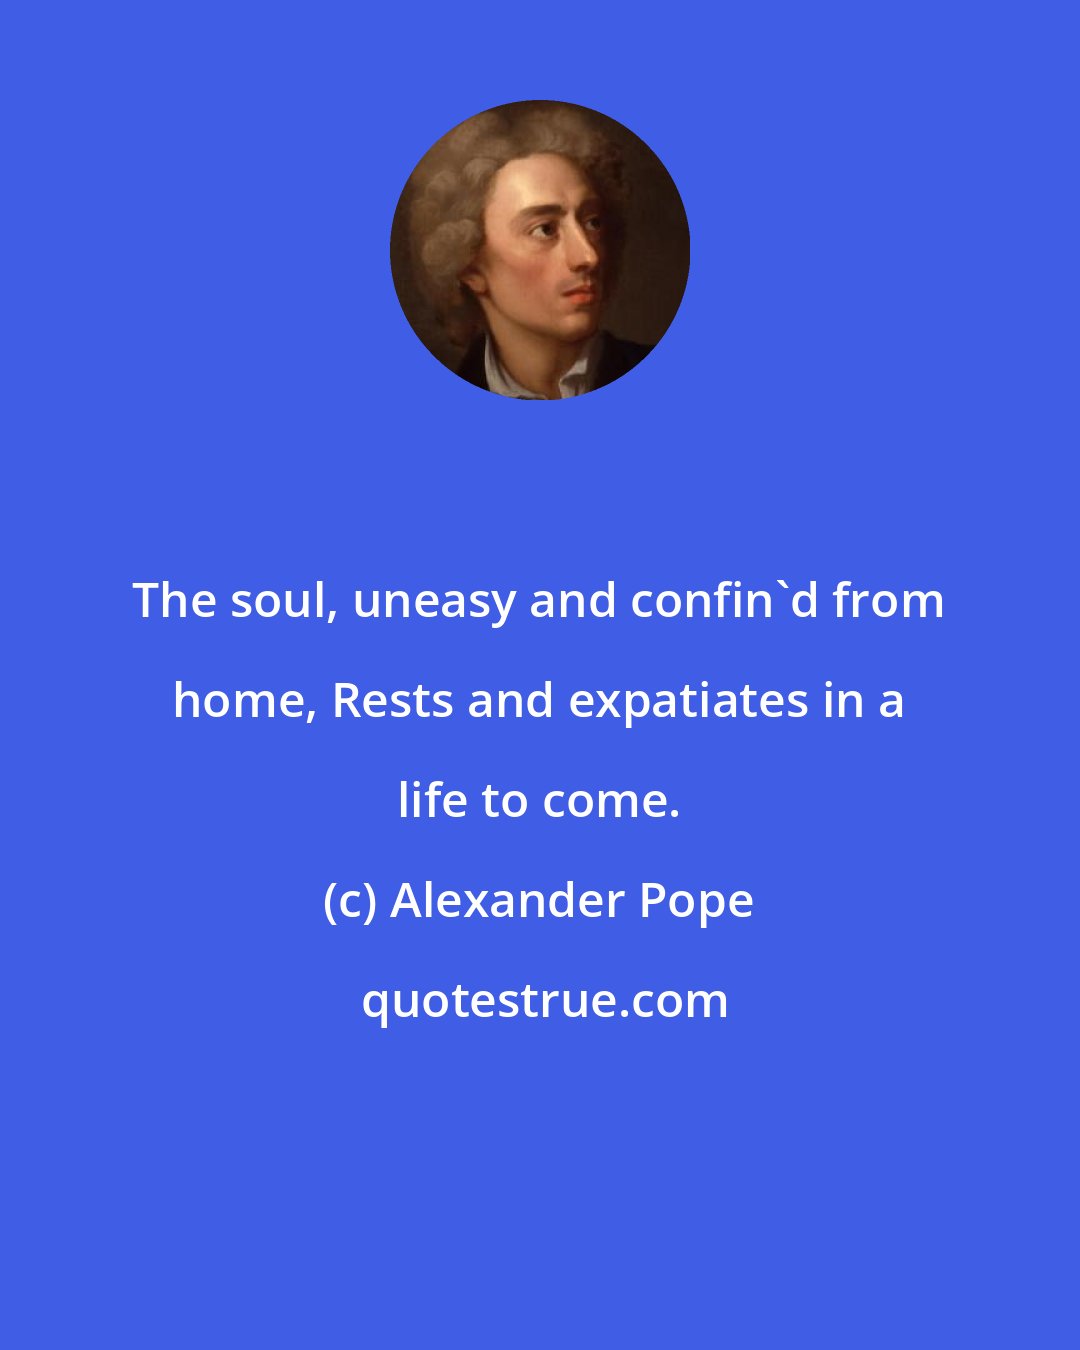 Alexander Pope: The soul, uneasy and confin'd from home, Rests and expatiates in a life to come.